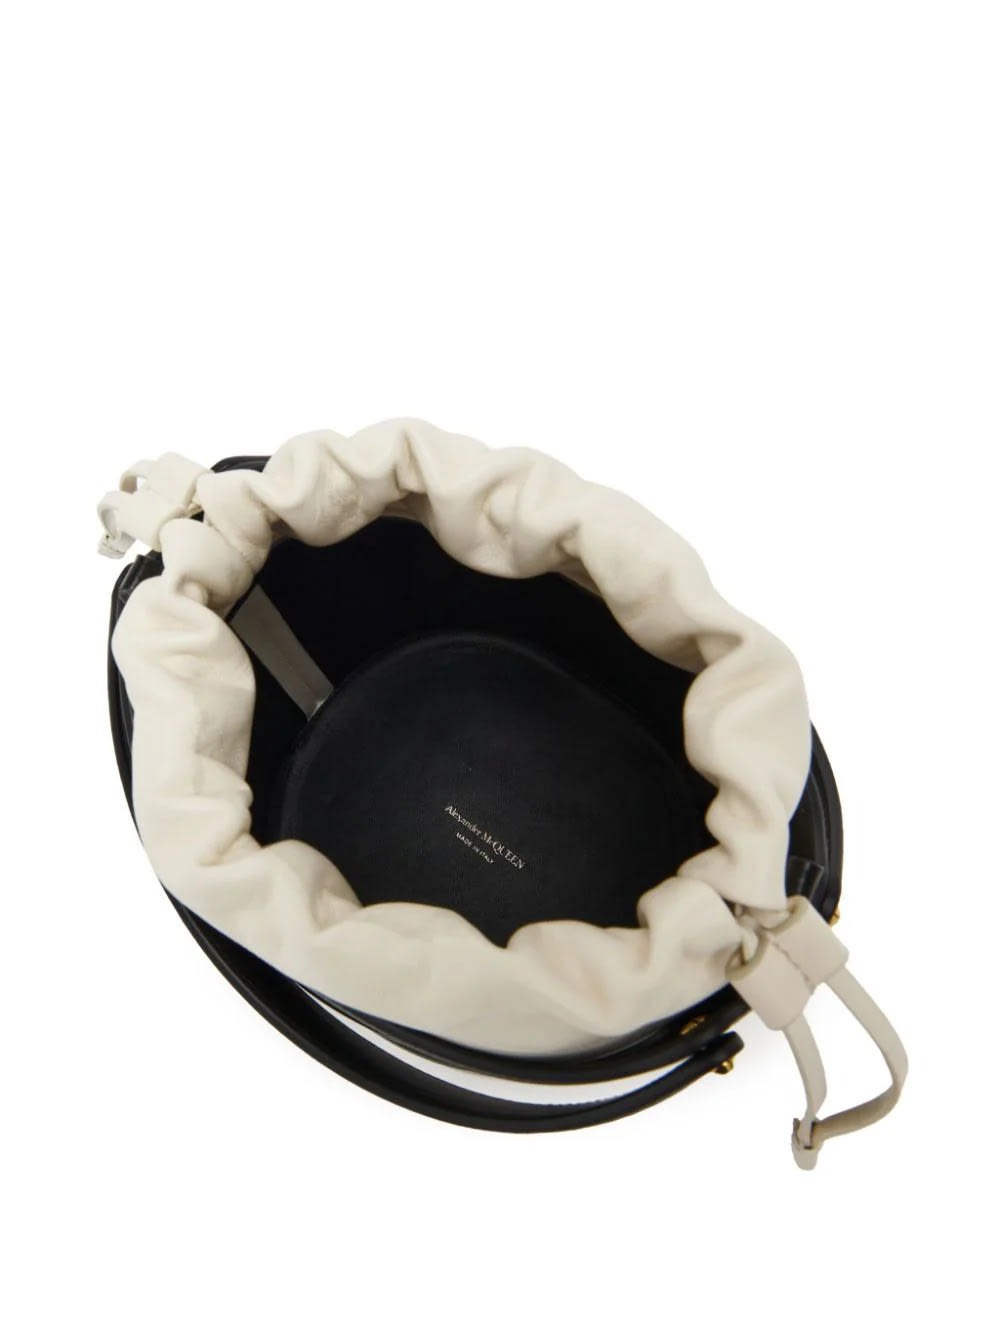 Shop Alexander Mcqueen The Rise Bucket Bag In Black And Soft Ivory In White